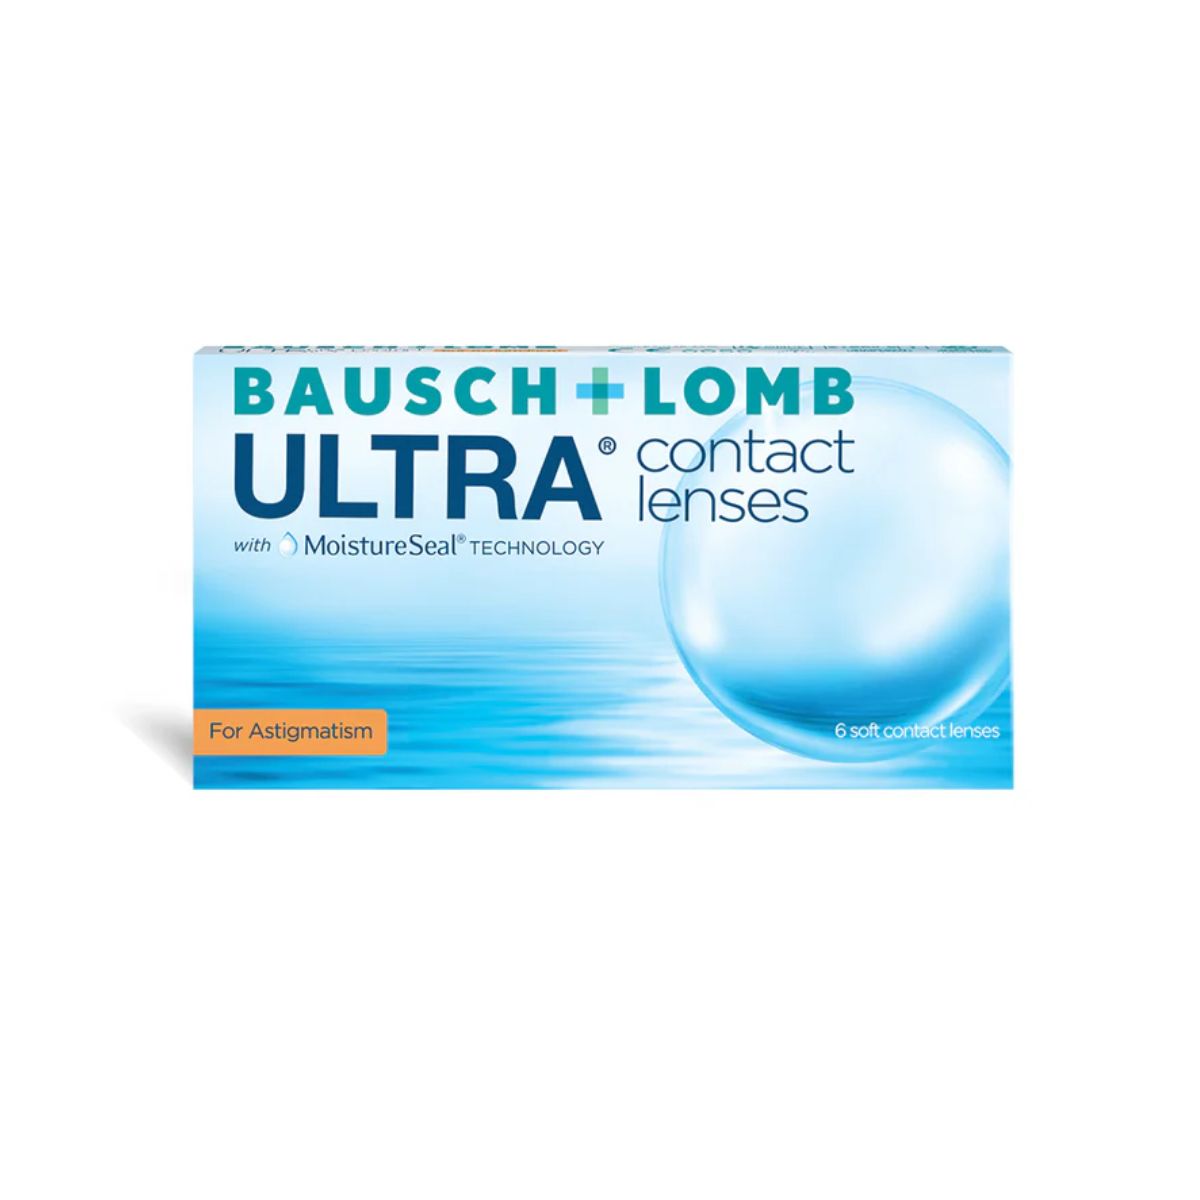 "Bausch + Lomb Ultra For Astigmatism: Monthly Contact Lenses"